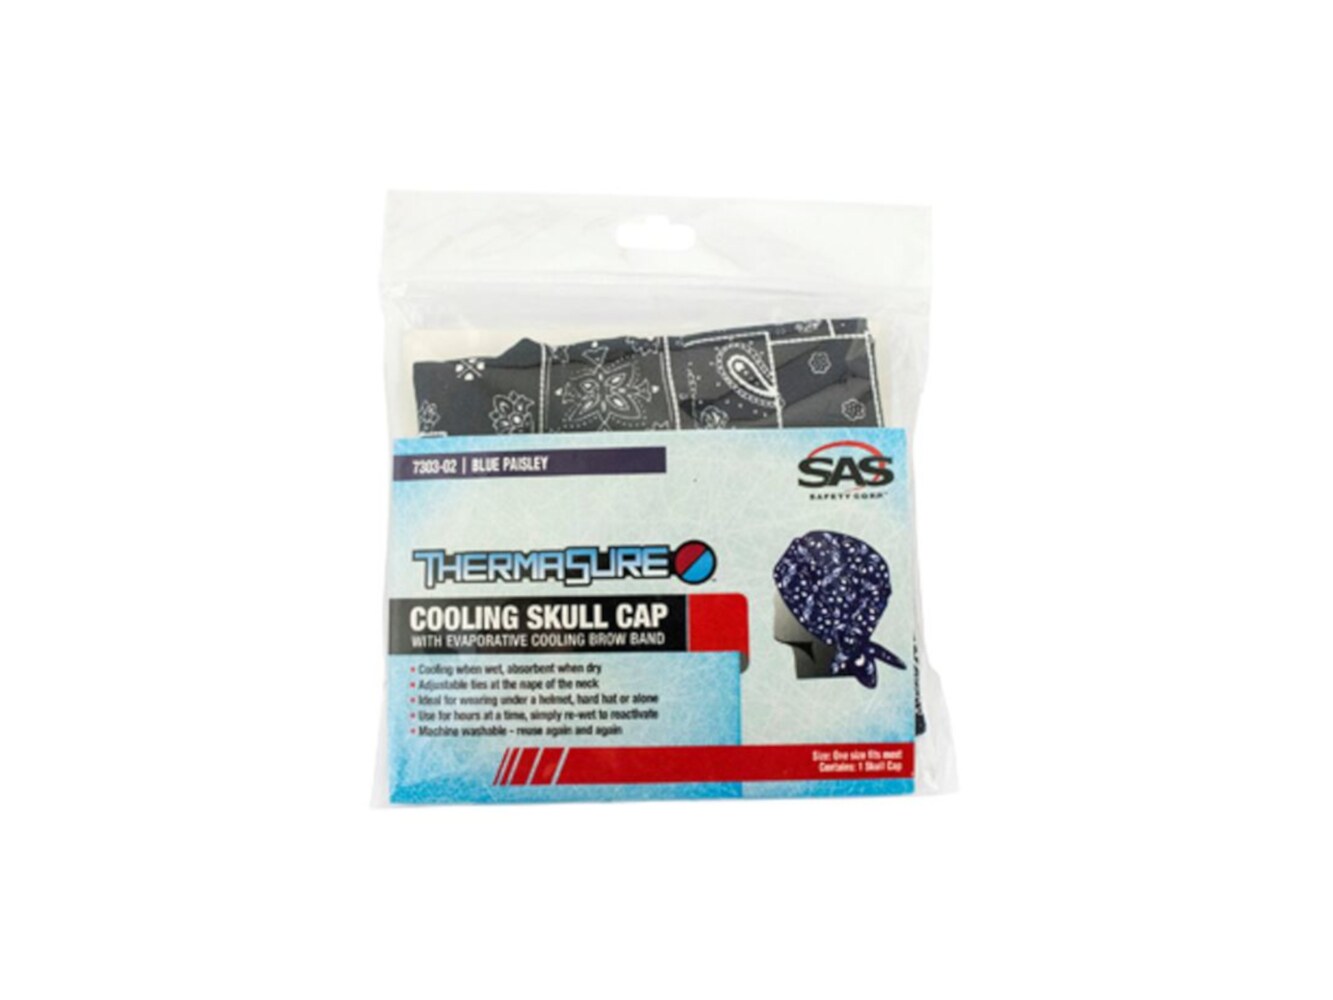 Chill-Its Blue Pva Neck Wrap (One Size Fits Most)